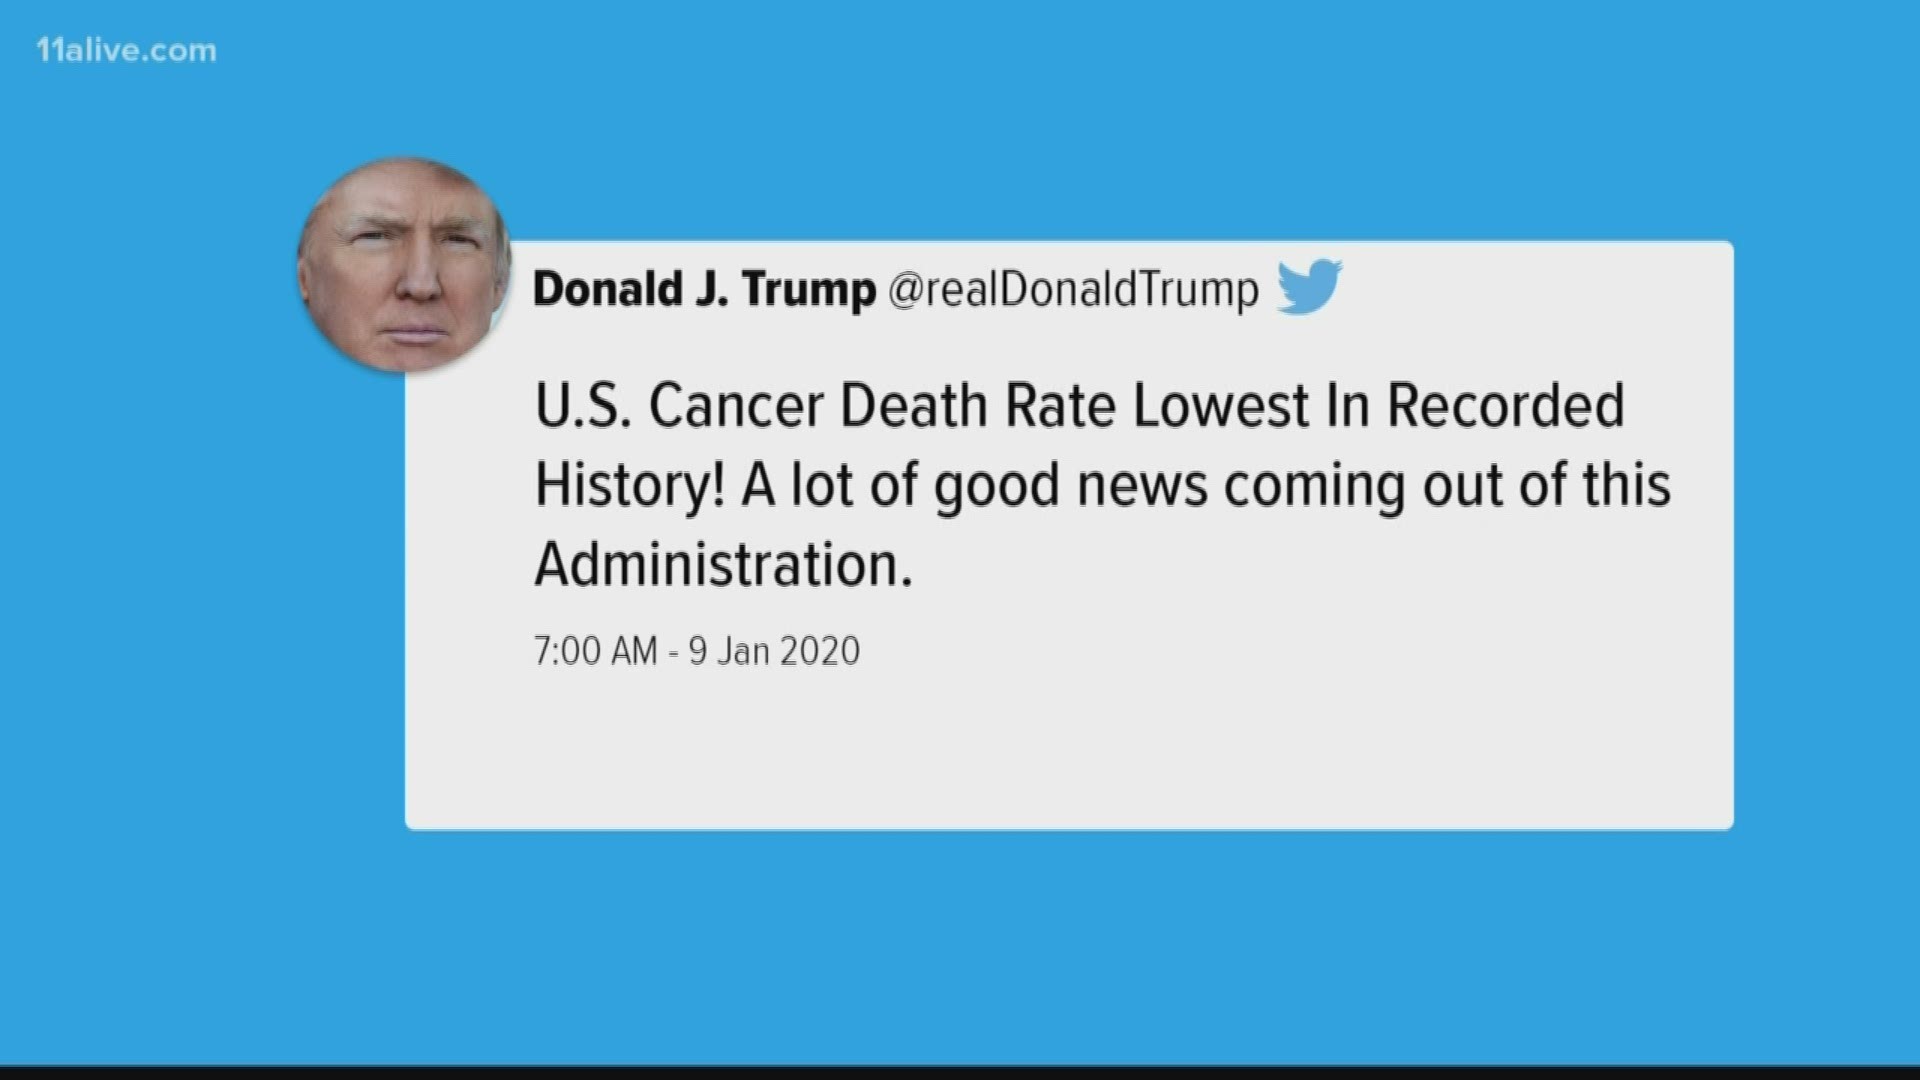 A day after congratulating his administration for the dramatic drop in cancer deaths, critics ask if it's true he tried to cut cancer research funds.